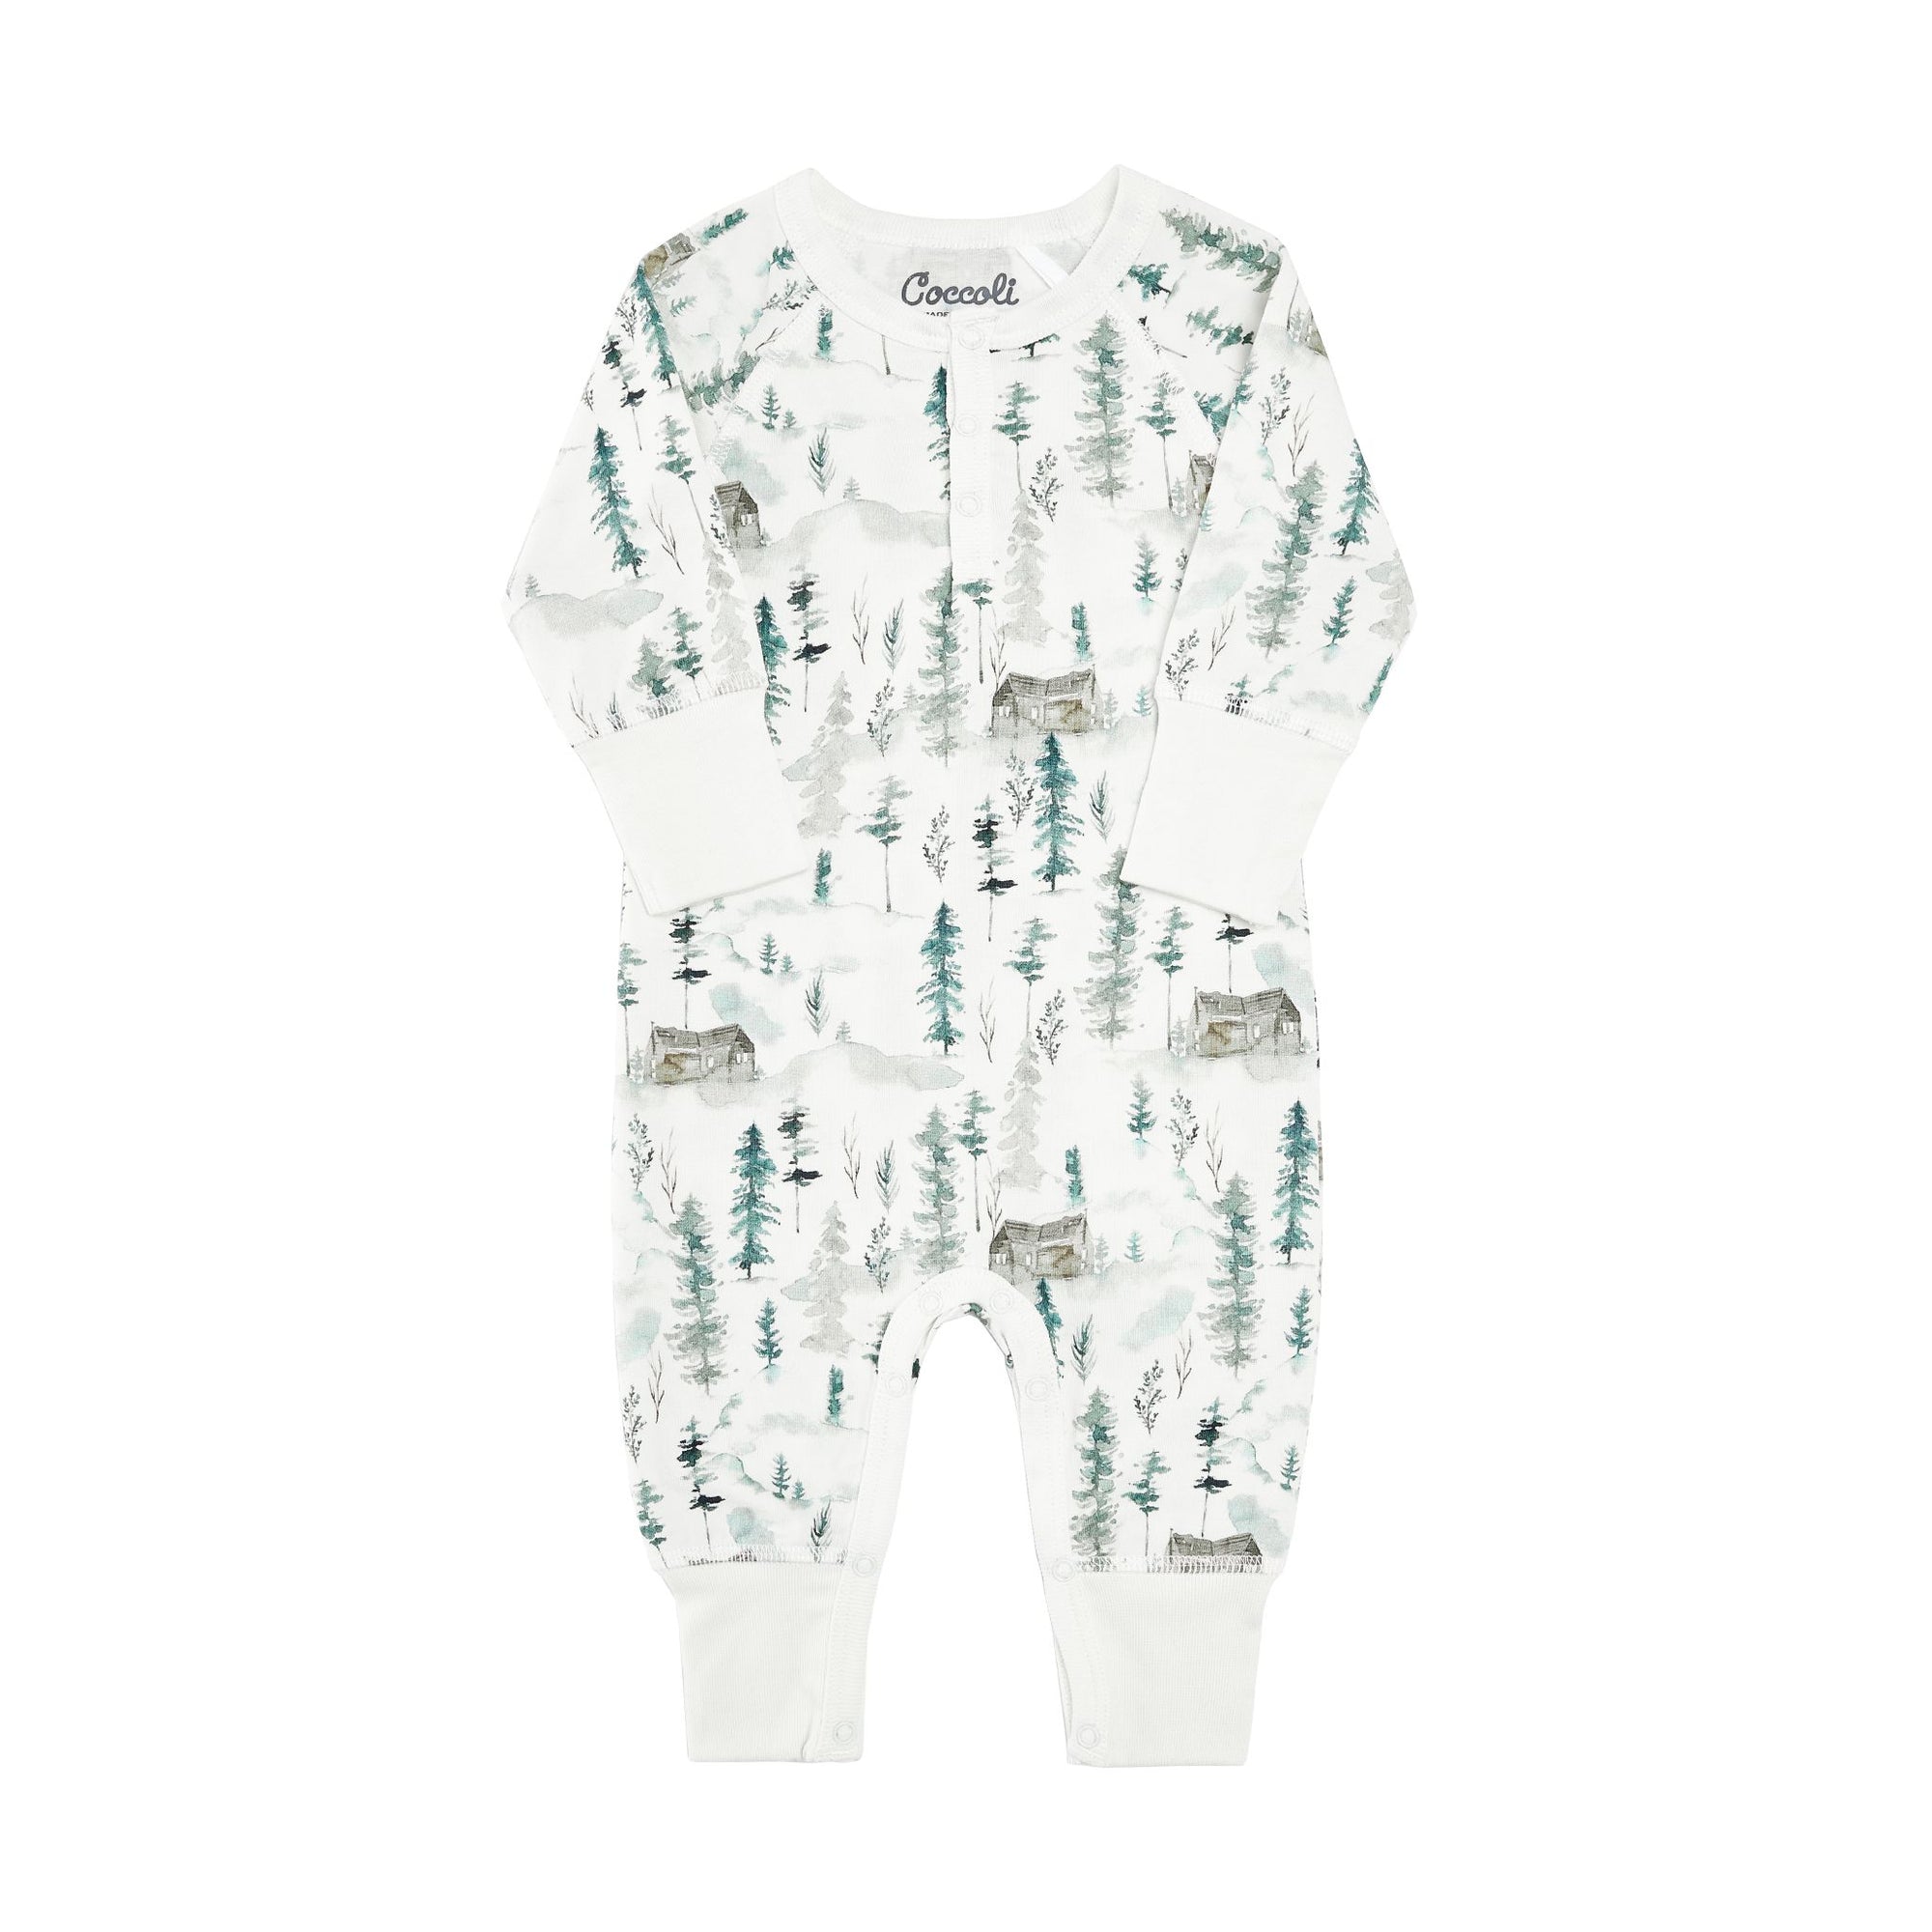 Coccoli Baby Footless Romper  UM5535-902